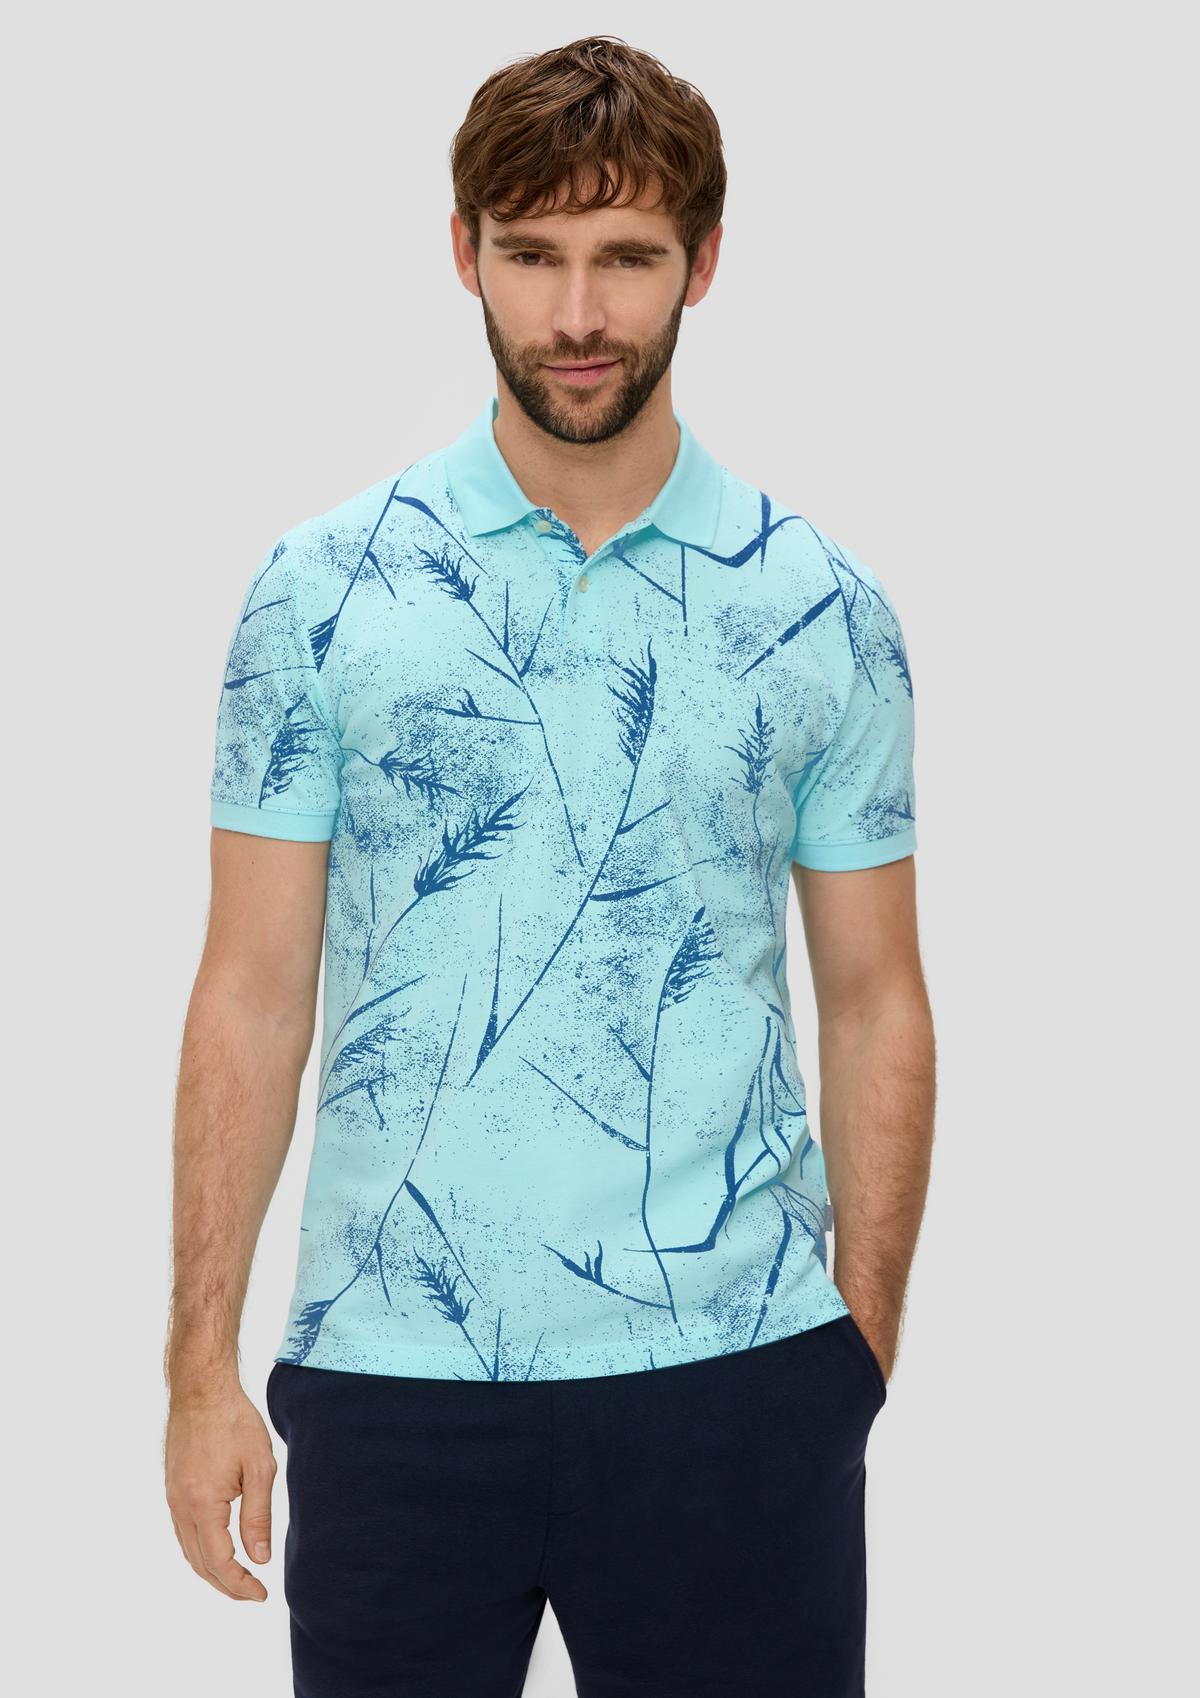 s.Oliver Polo shirt with an all-over print